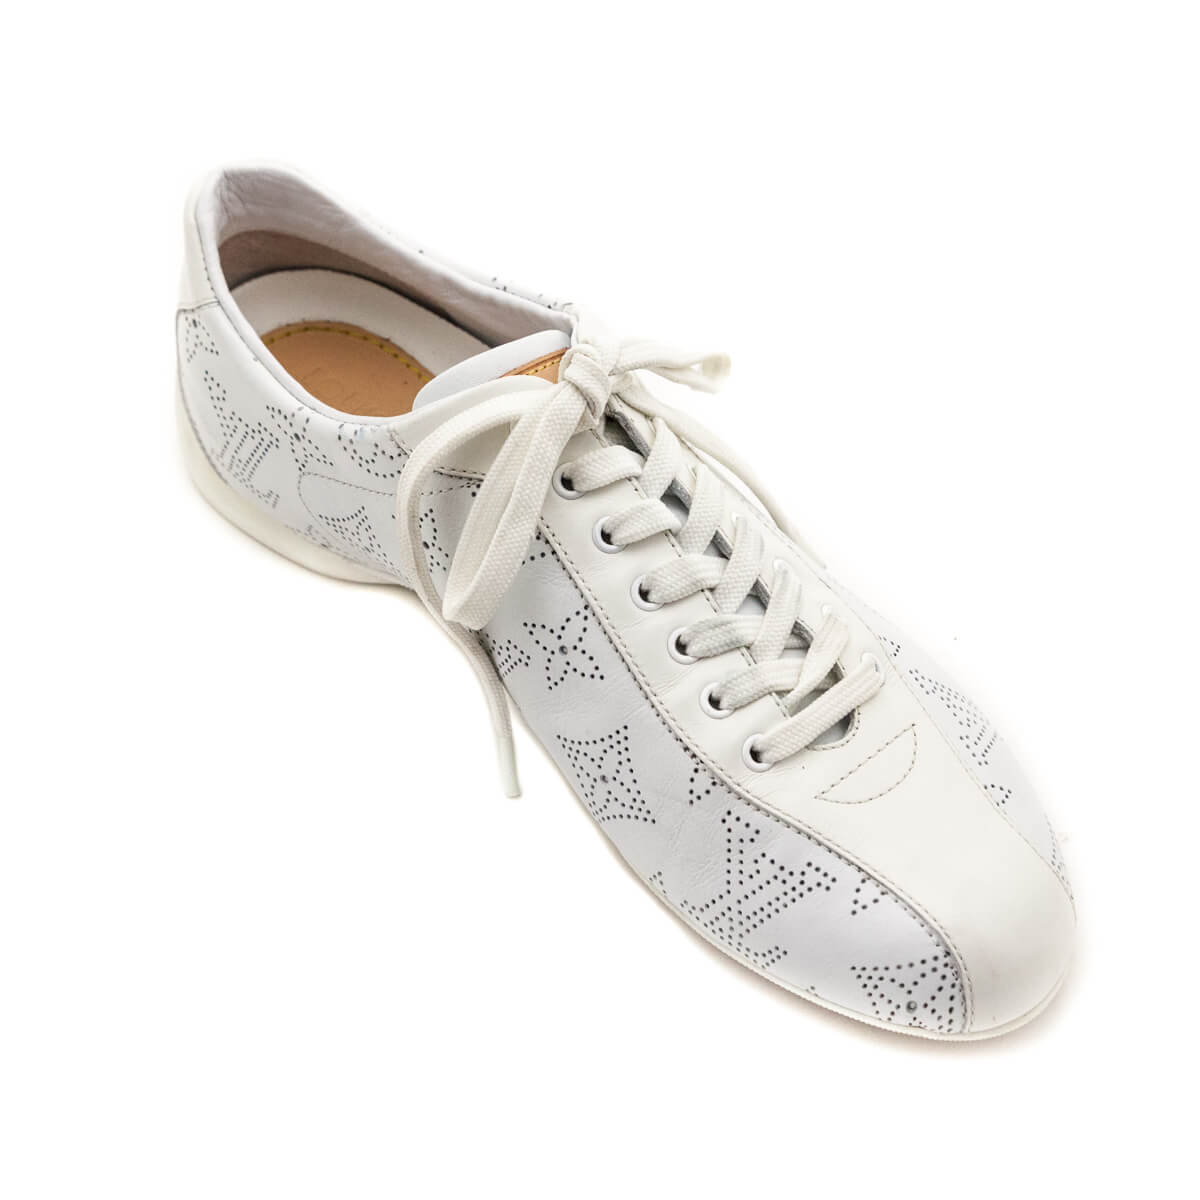 Louis Vuitton White Mahina Leather Low Top Sneakers Size US 5.5 | EU 35.5 - Love that Bag etc - Preowned Authentic Designer Handbags & Preloved Fashions